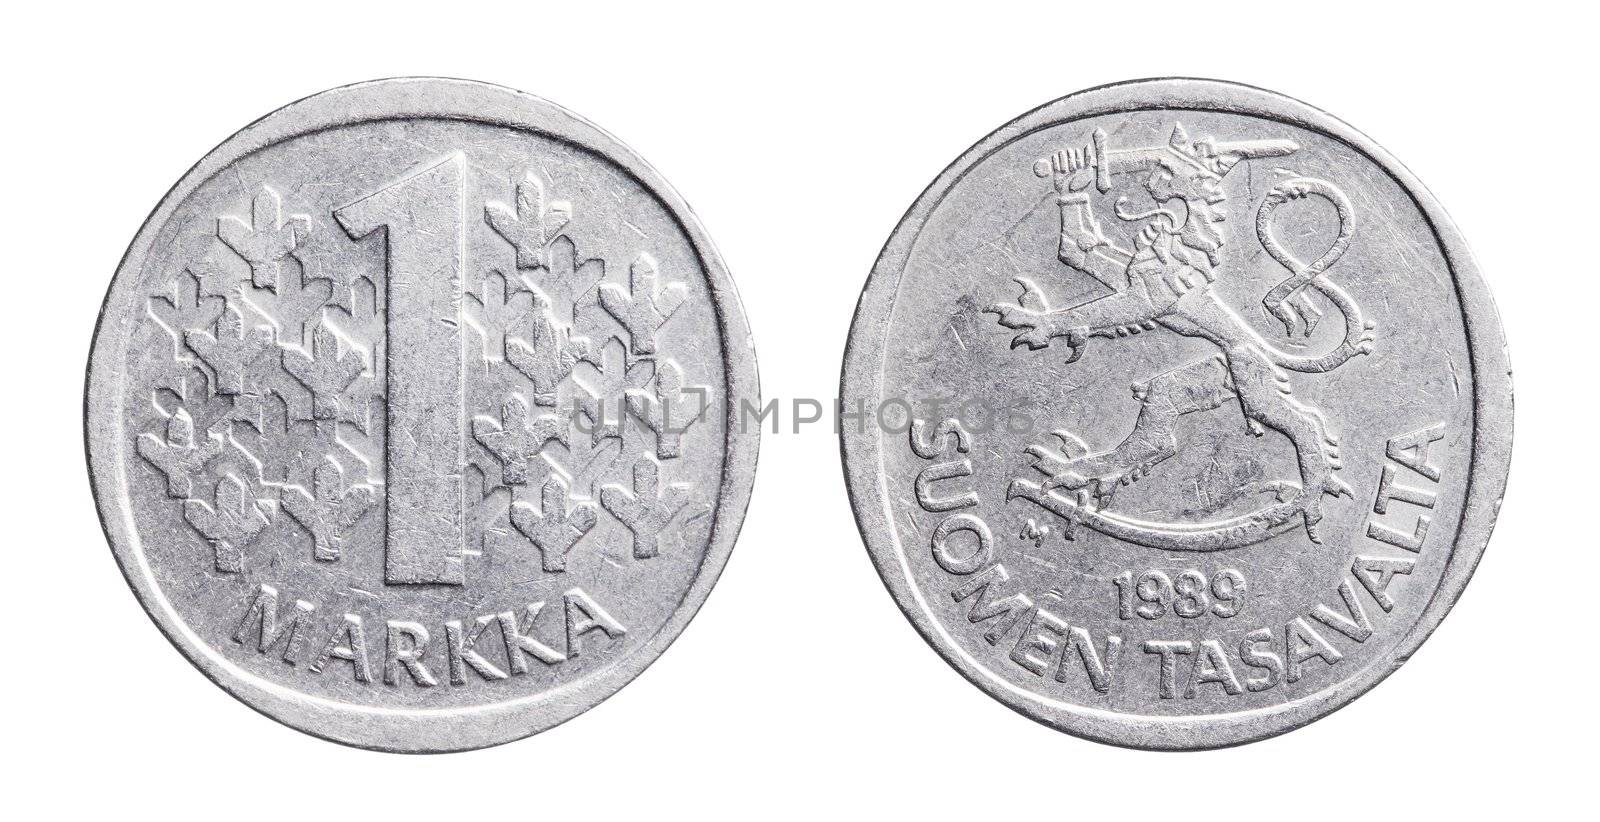 Finnish 1 Markka (FIM) coin from 1989. This type of coin was struck between 1964 and 1993. The Finnish markka was the currency  of Finland  from 1860 until 28 February 2002, when it ceased to be legal tender because of the introduction of Euro.